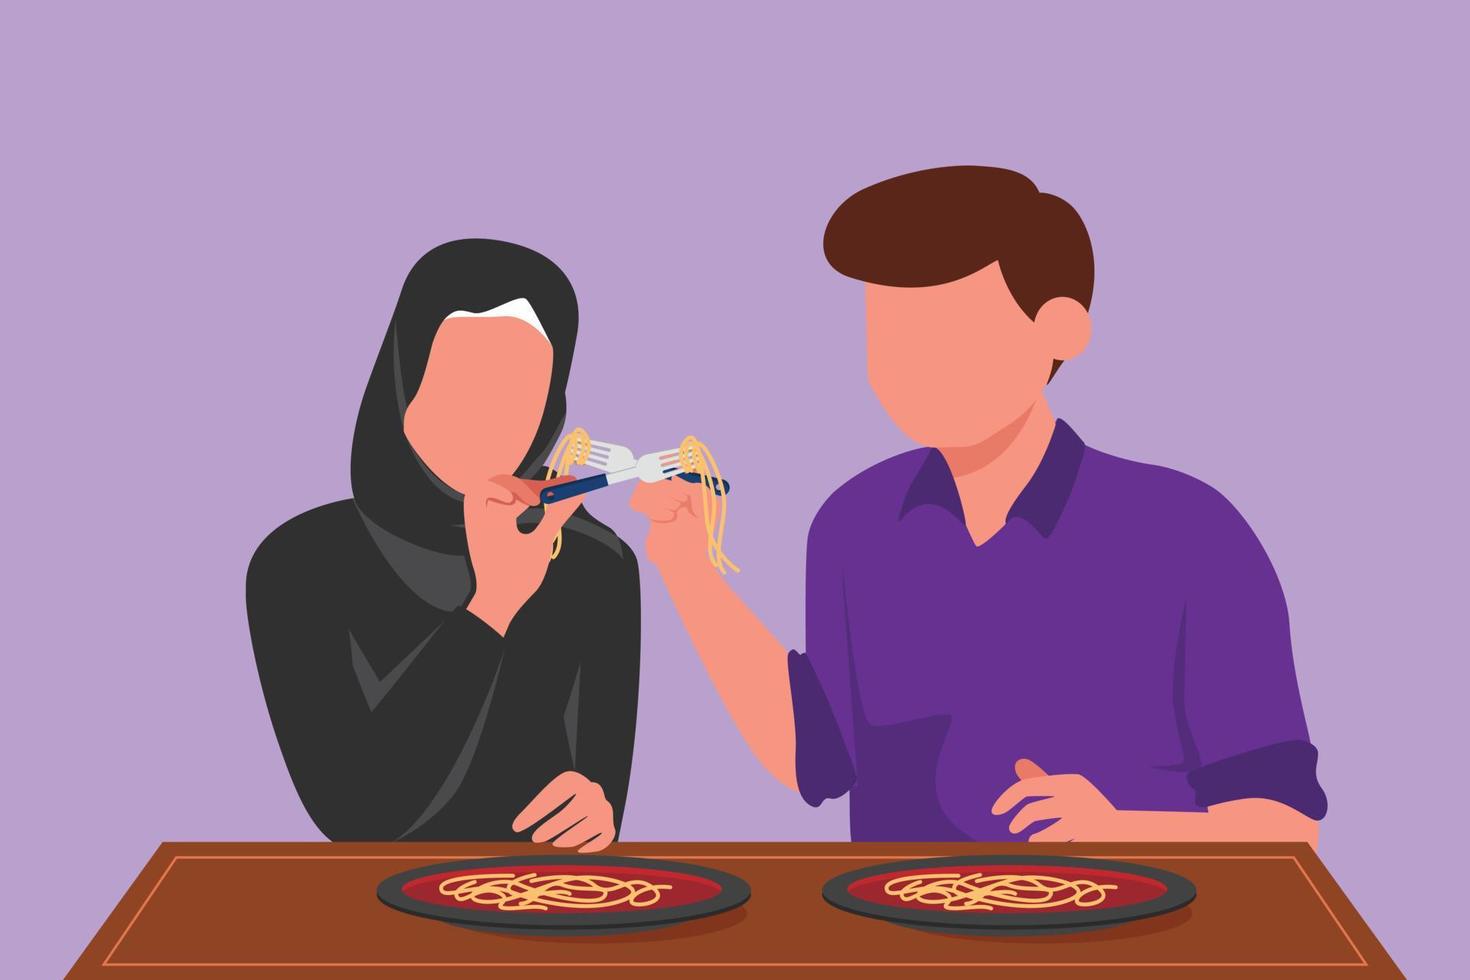 Cartoon flat style drawing romantic Arab couple eating noodle together. Happy man and woman characters sitting at table eating fresh Italian cuisine pasta noodles. Graphic design vector illustration